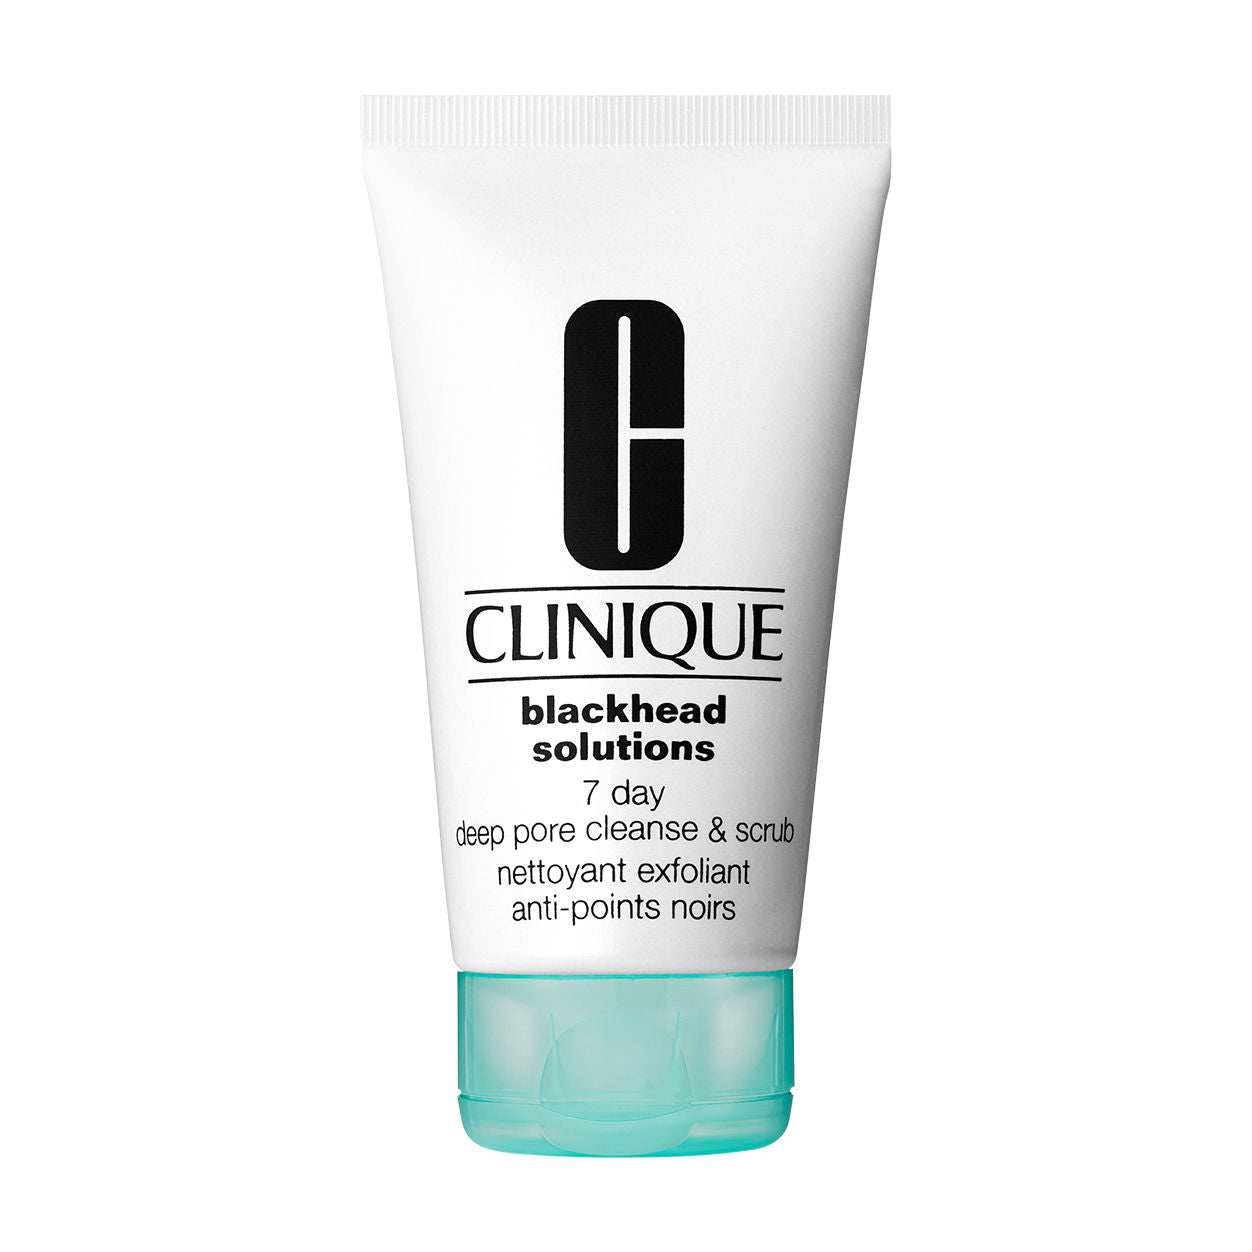 Clinique Blackhead Solutions 7 Day Deep Pore Cleanse and Scrub main image